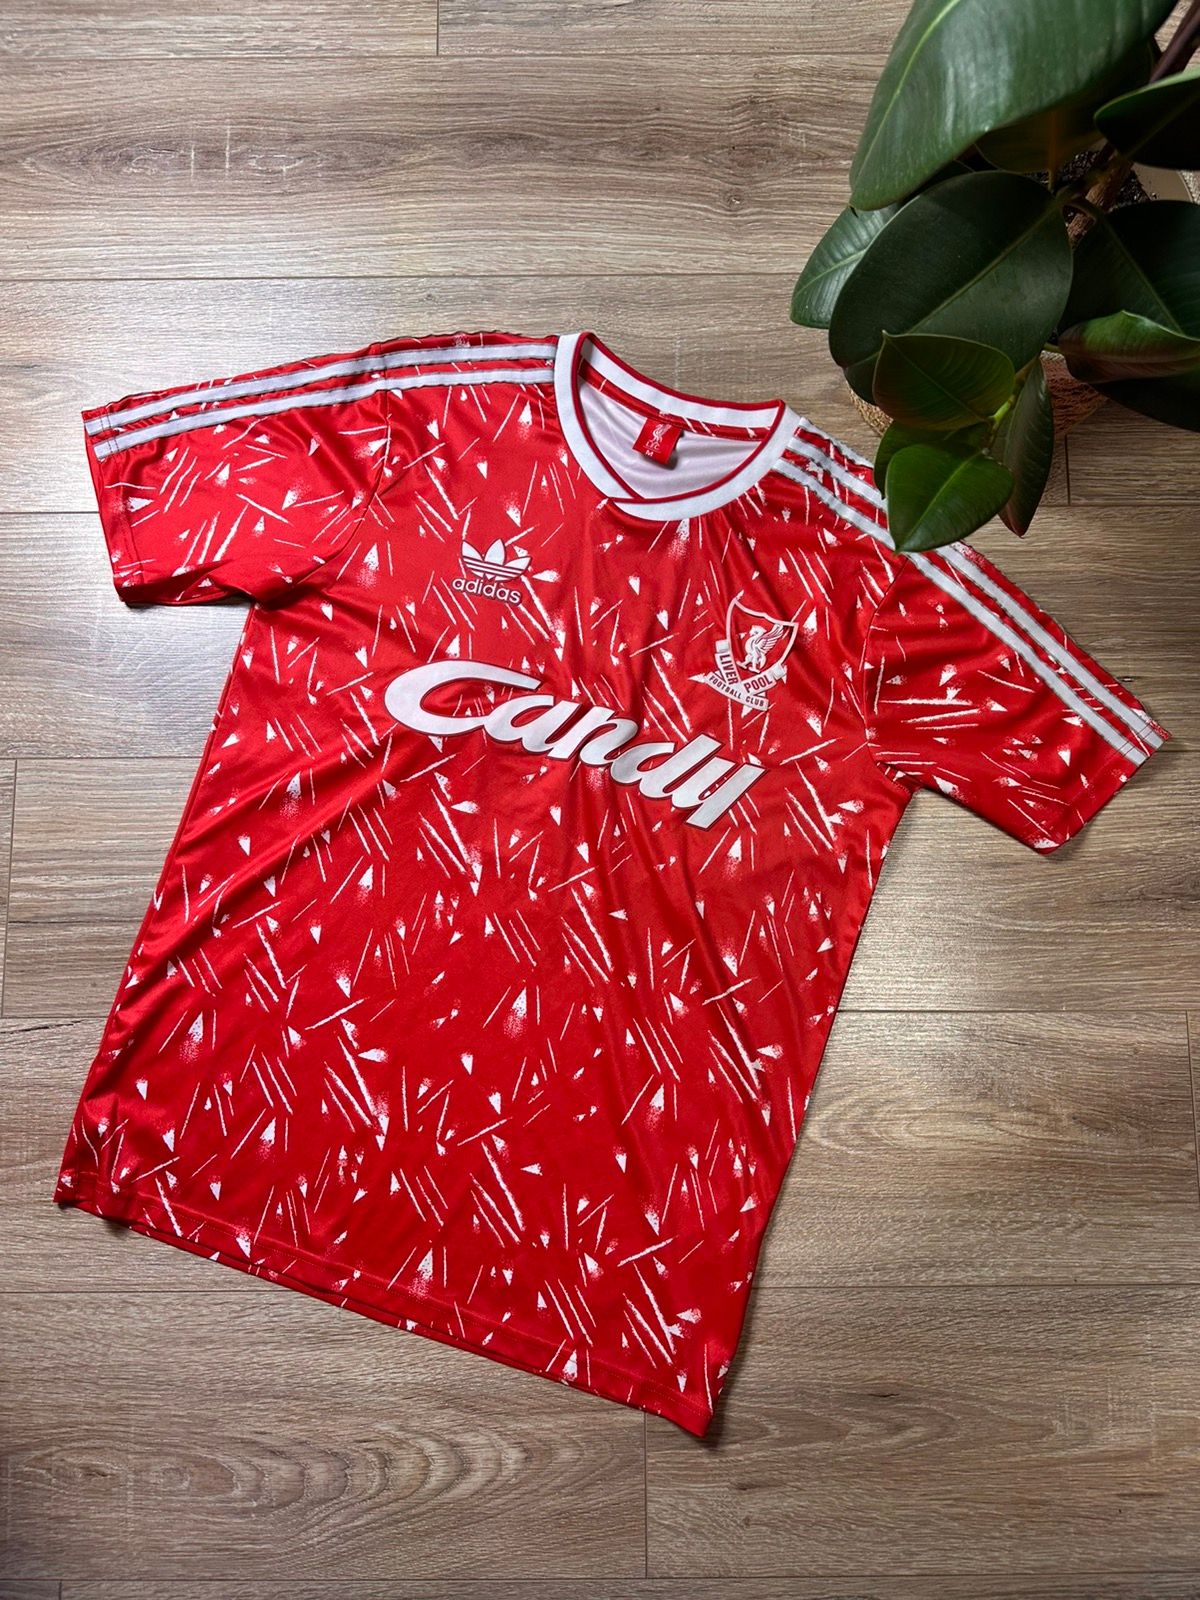 Pre-owned Adidas X Liverpool Retro Fc Liverpool 1989/1991 Soccer Football Shirt Jersey In Red